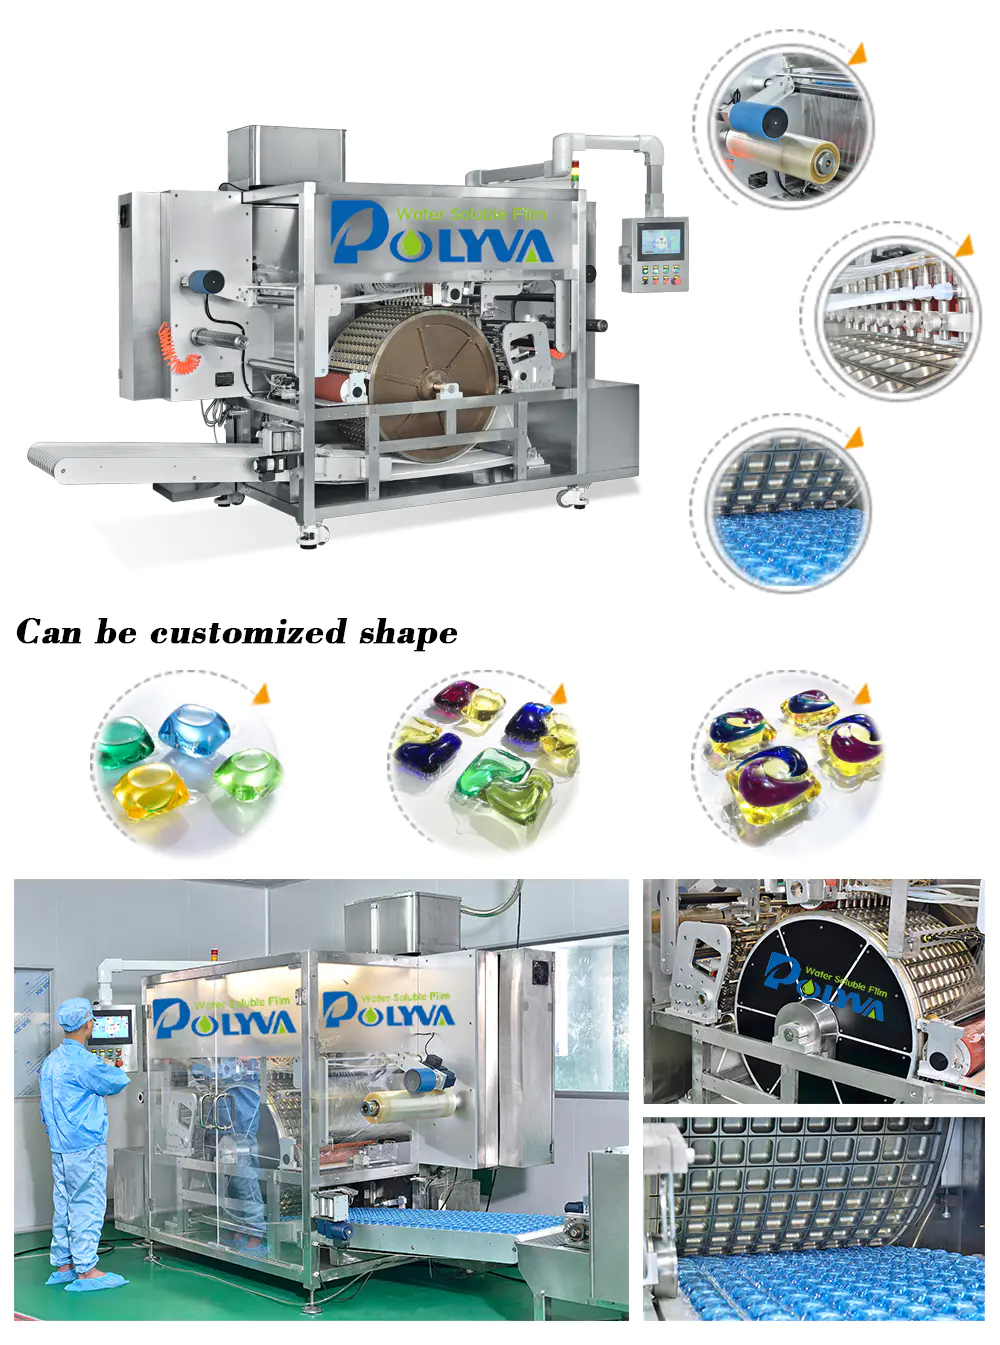 POLYVA high capacity water soluble film packaging supplier for liquid pods